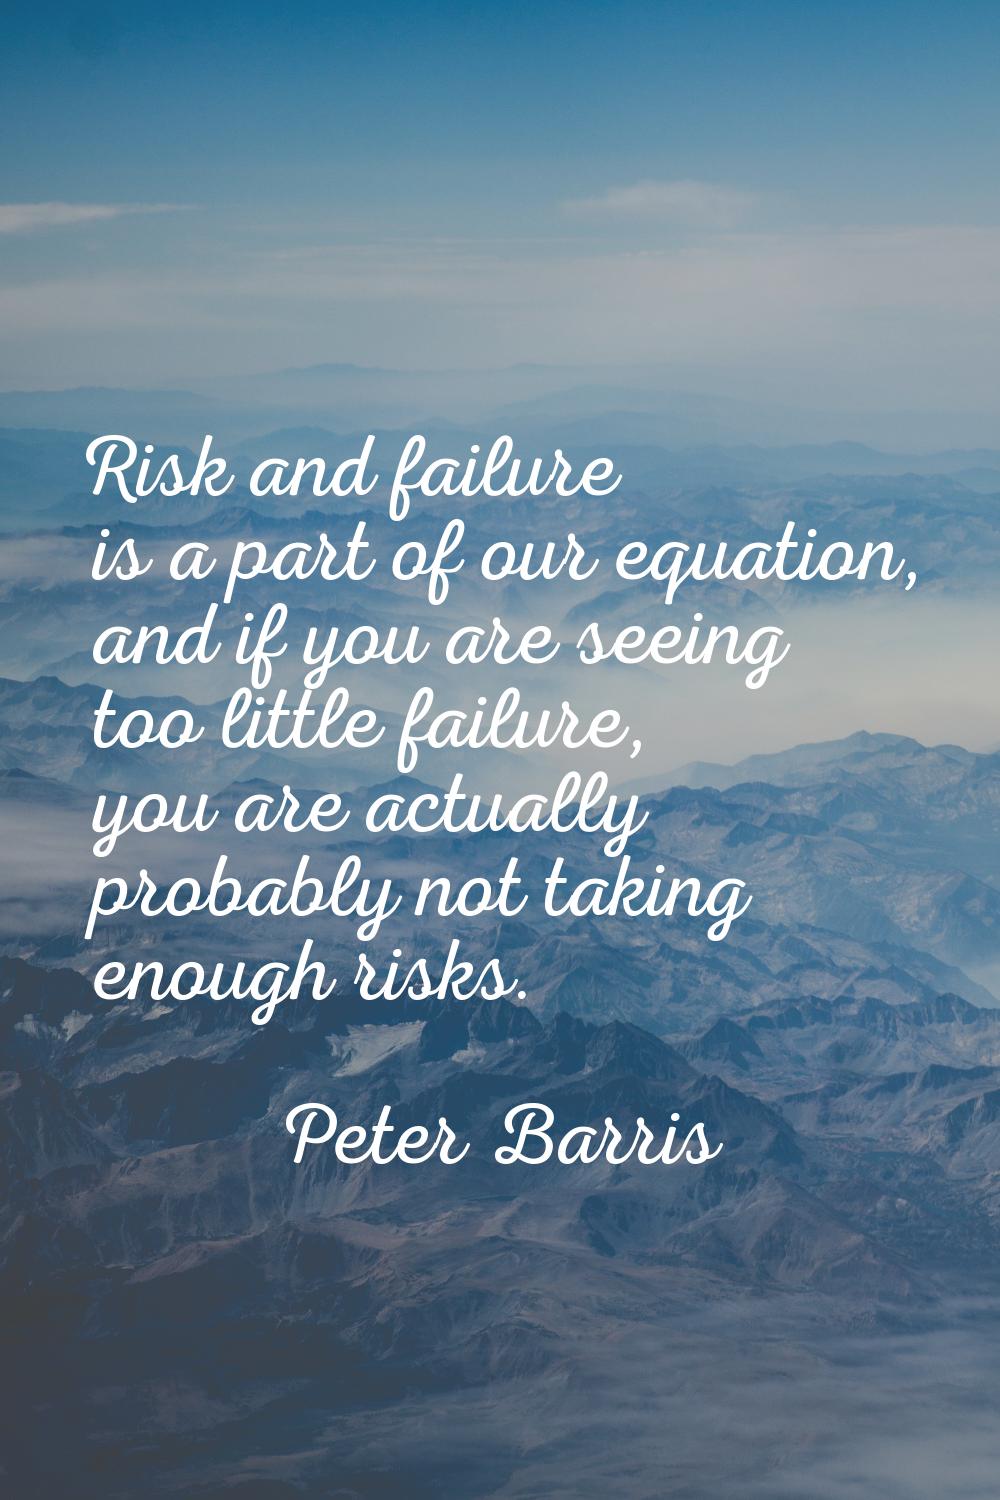 Risk and failure is a part of our equation, and if you are seeing too little failure, you are actua